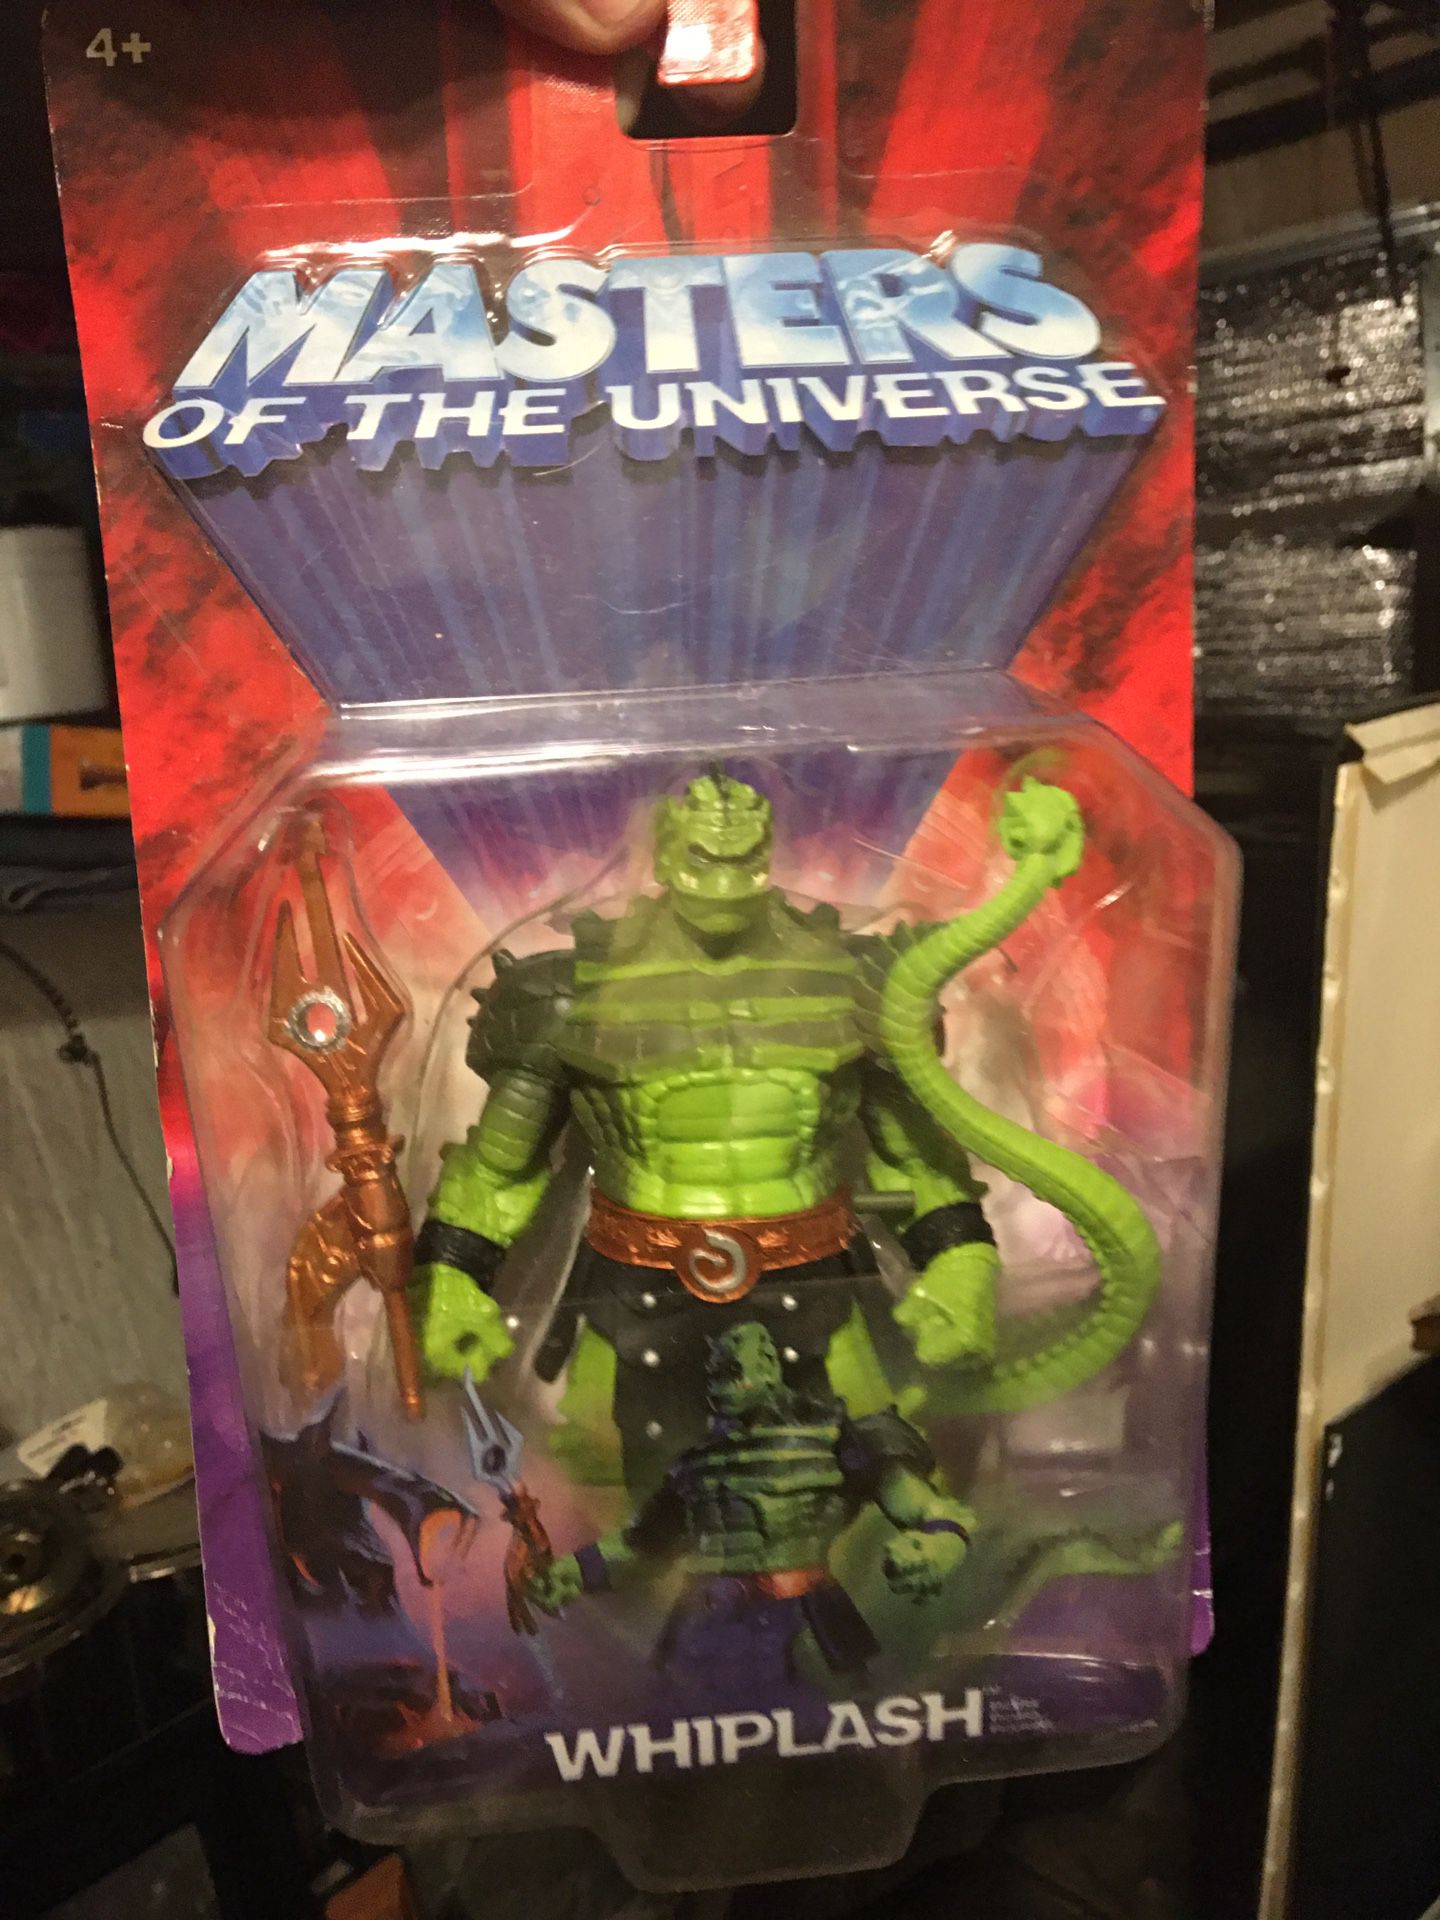 Collectors 2002 masters of the universe ‘ whiplash’ action figure sells online 35-45+